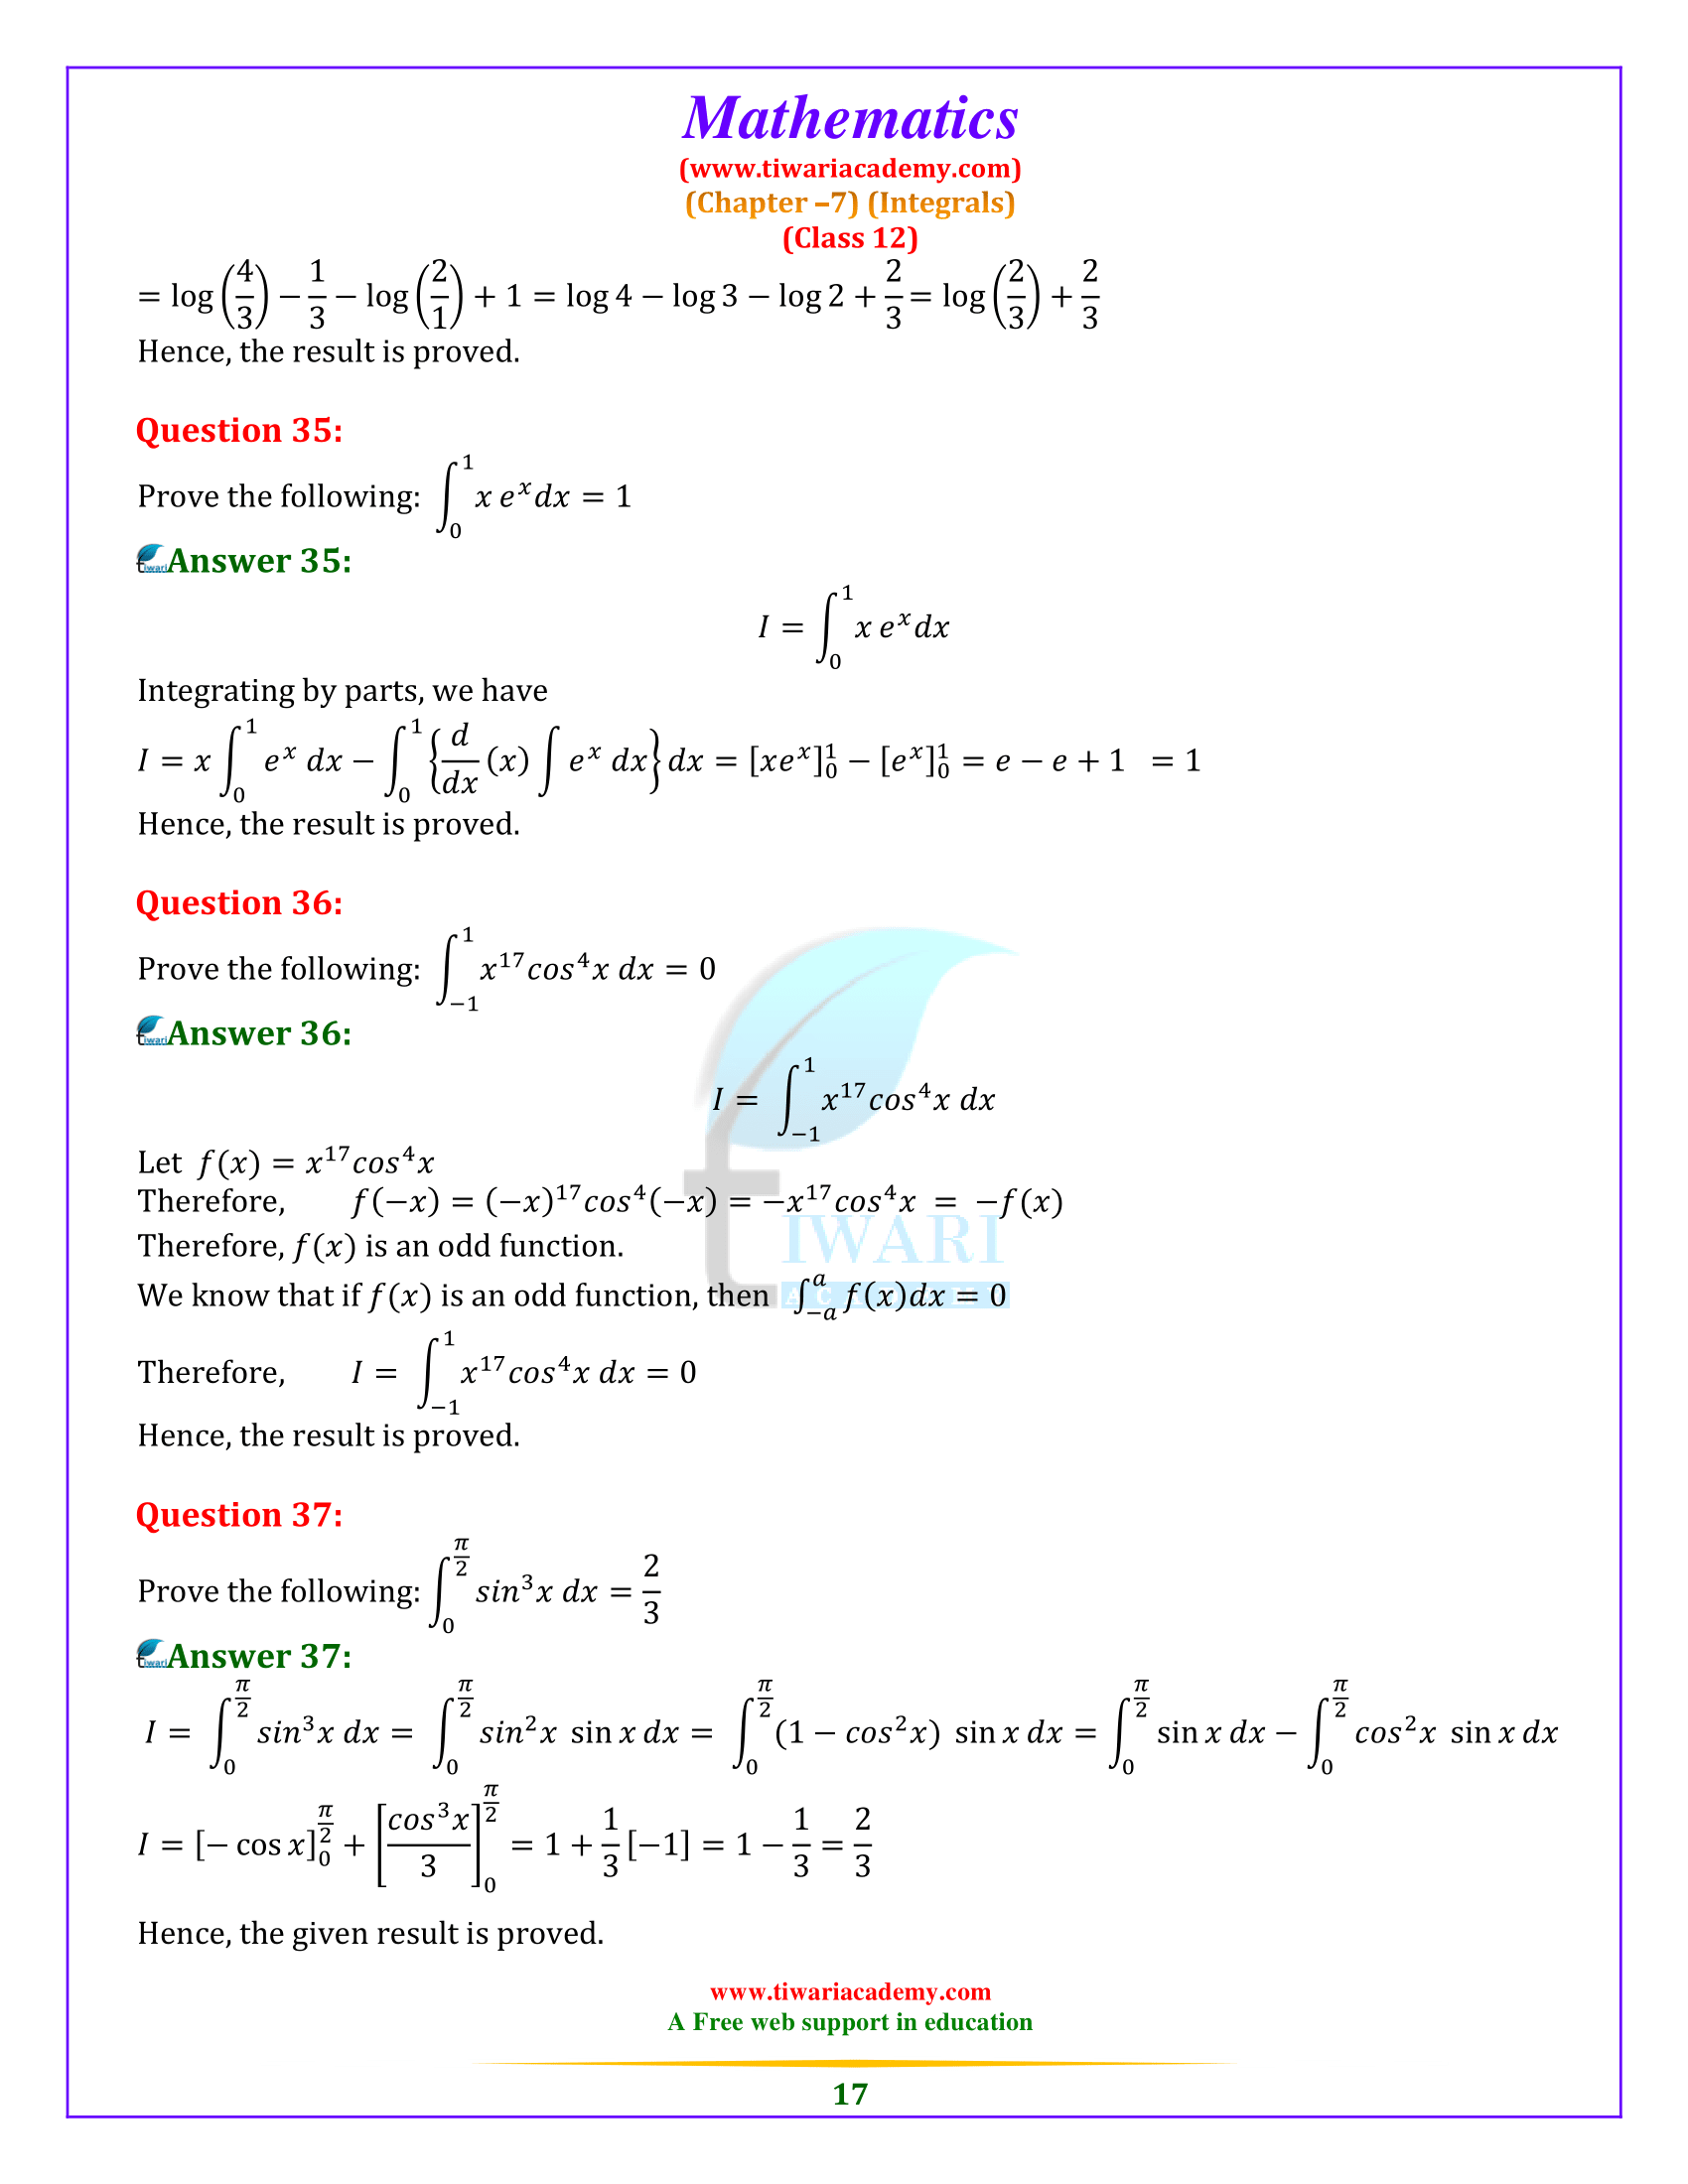 12 Maths Miscellabeous 7 guide free